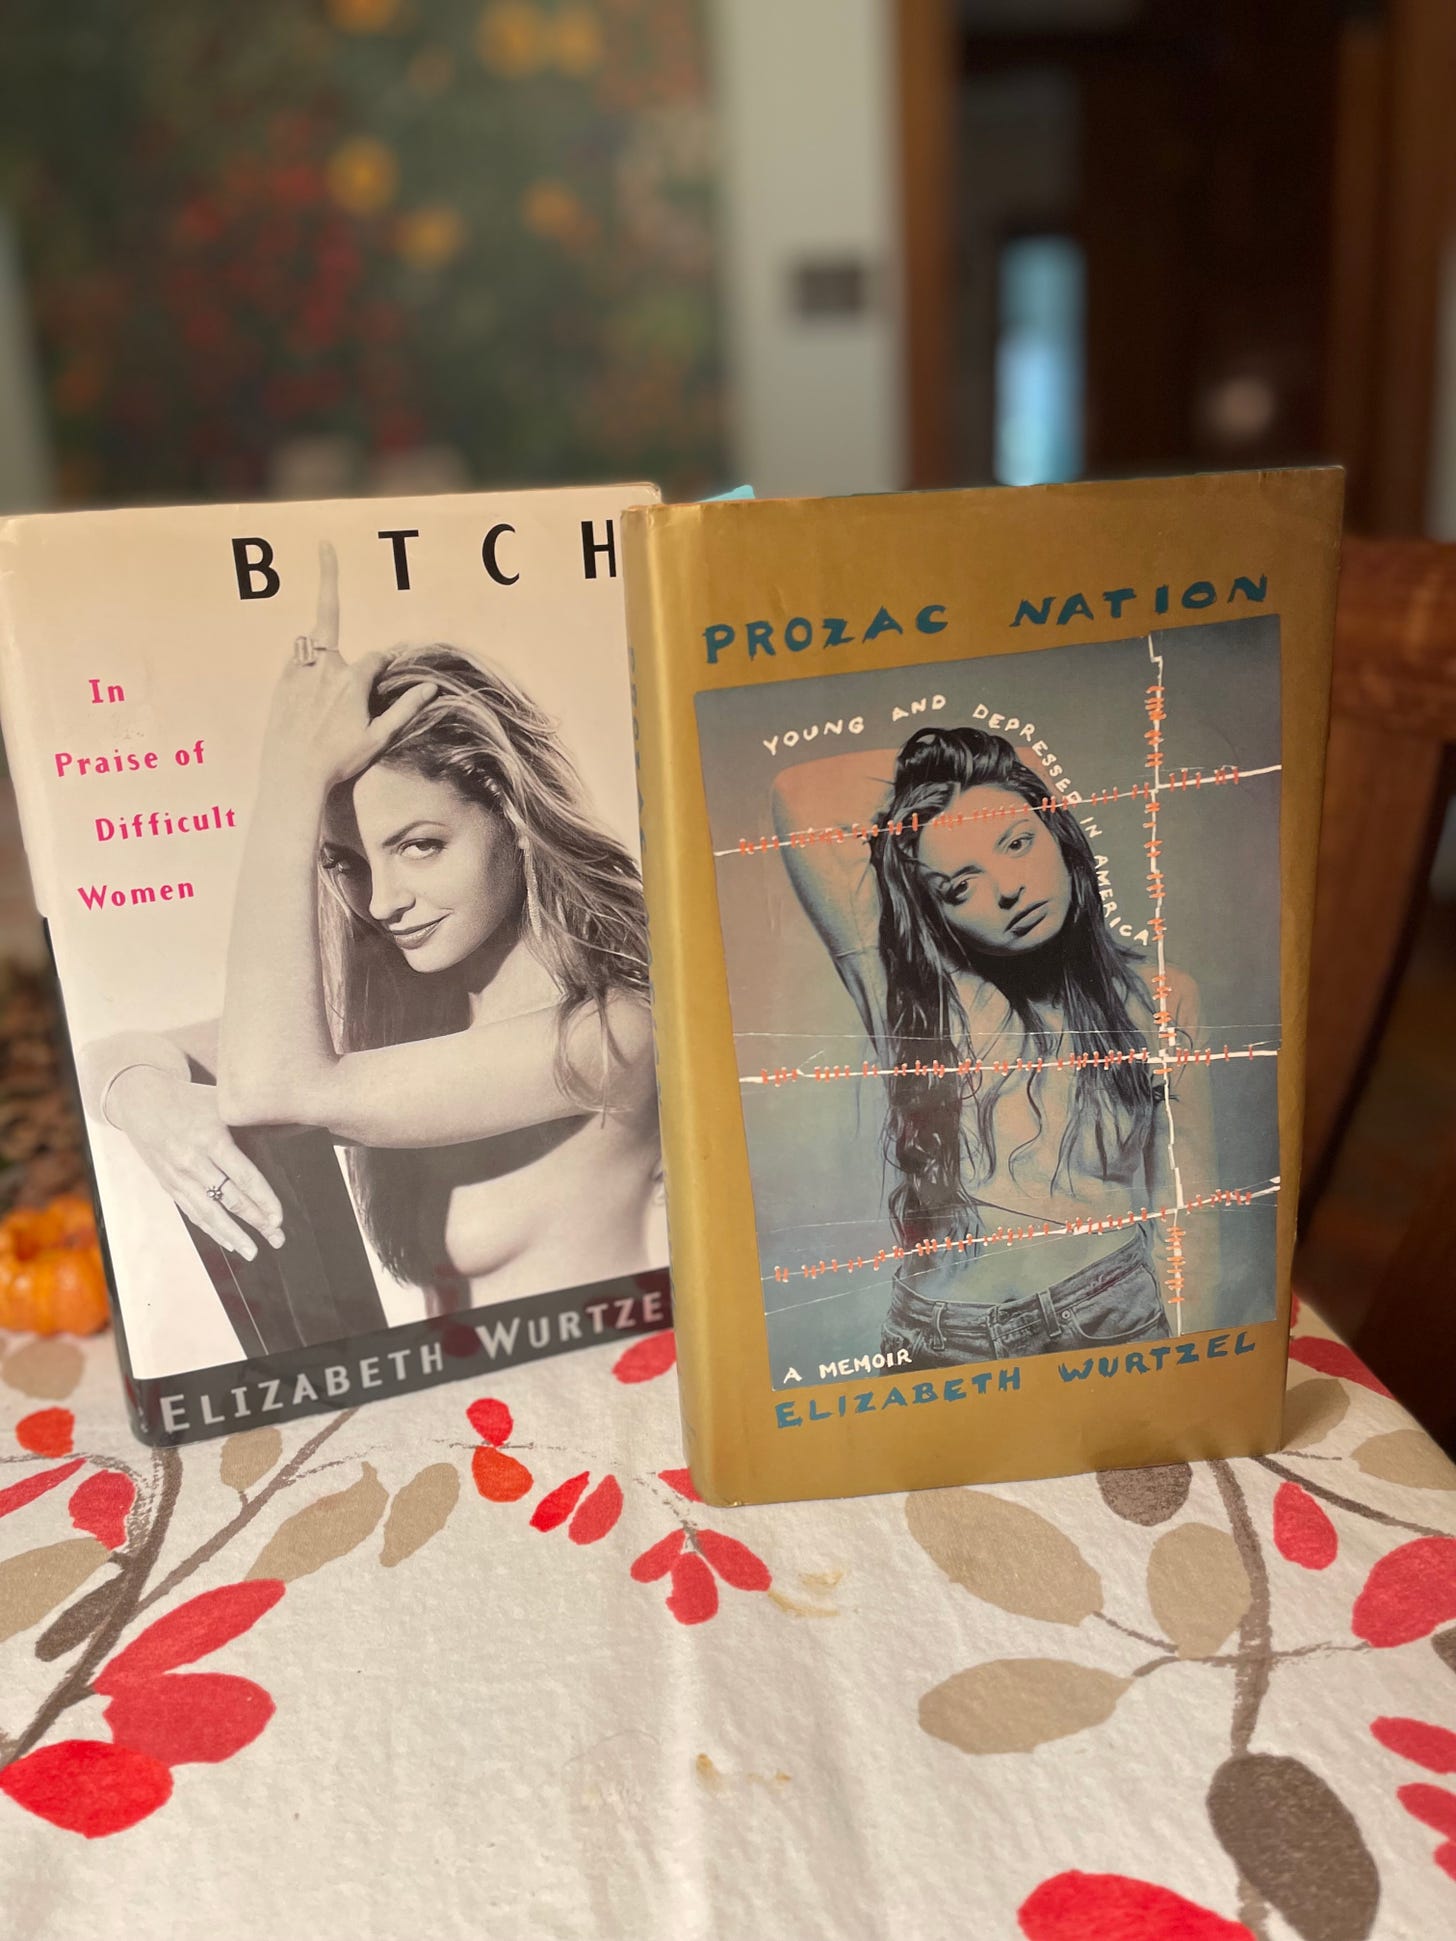 Authors copies of Bitch: In Praise of Difficult Women and "Prozac Nation" taken as a still life